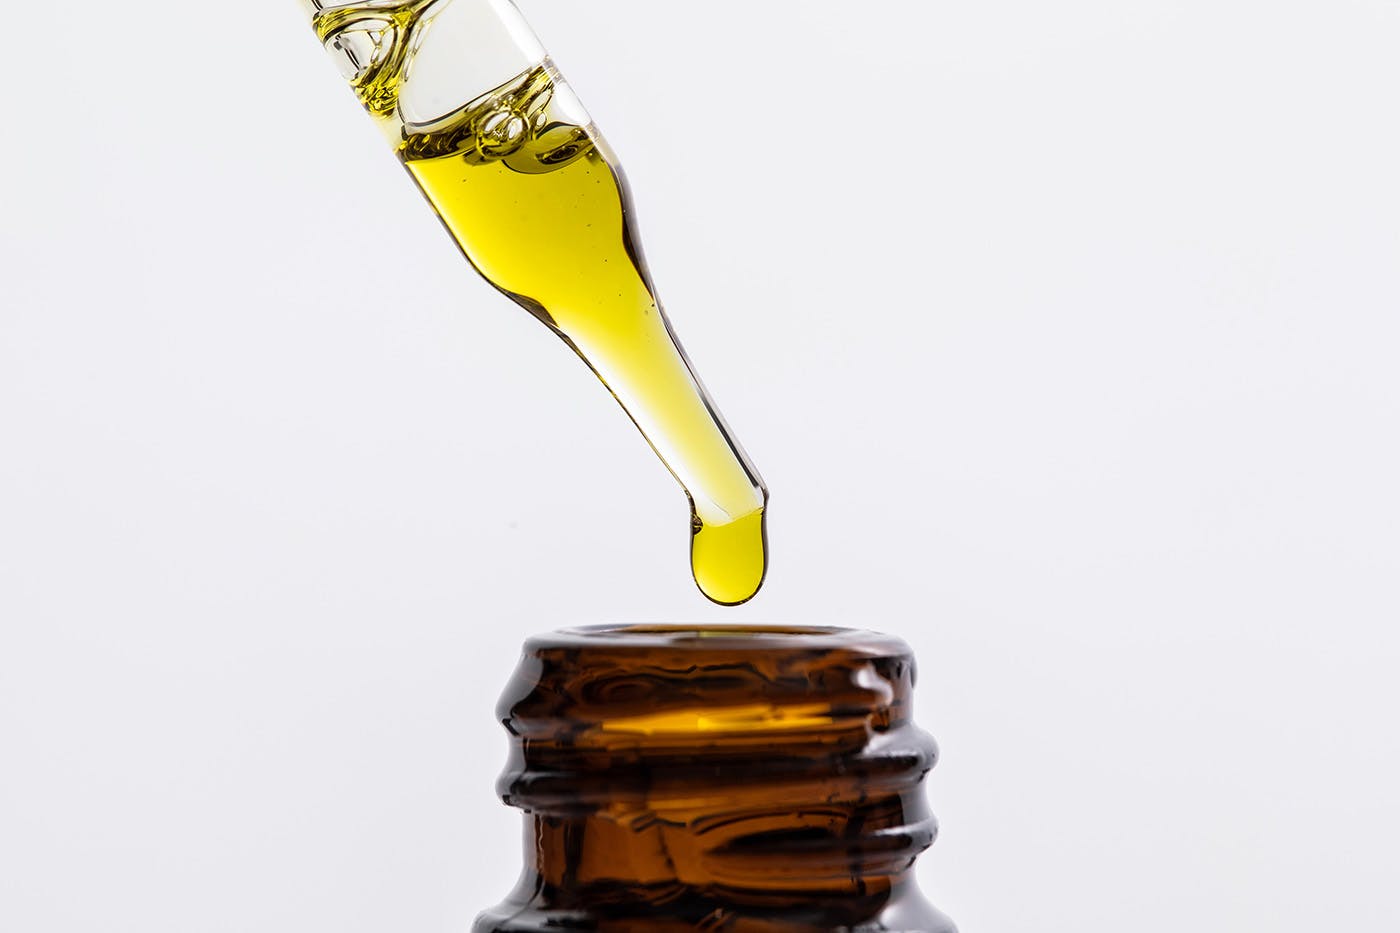 Delta 8 Oil tincture with dropper on white background